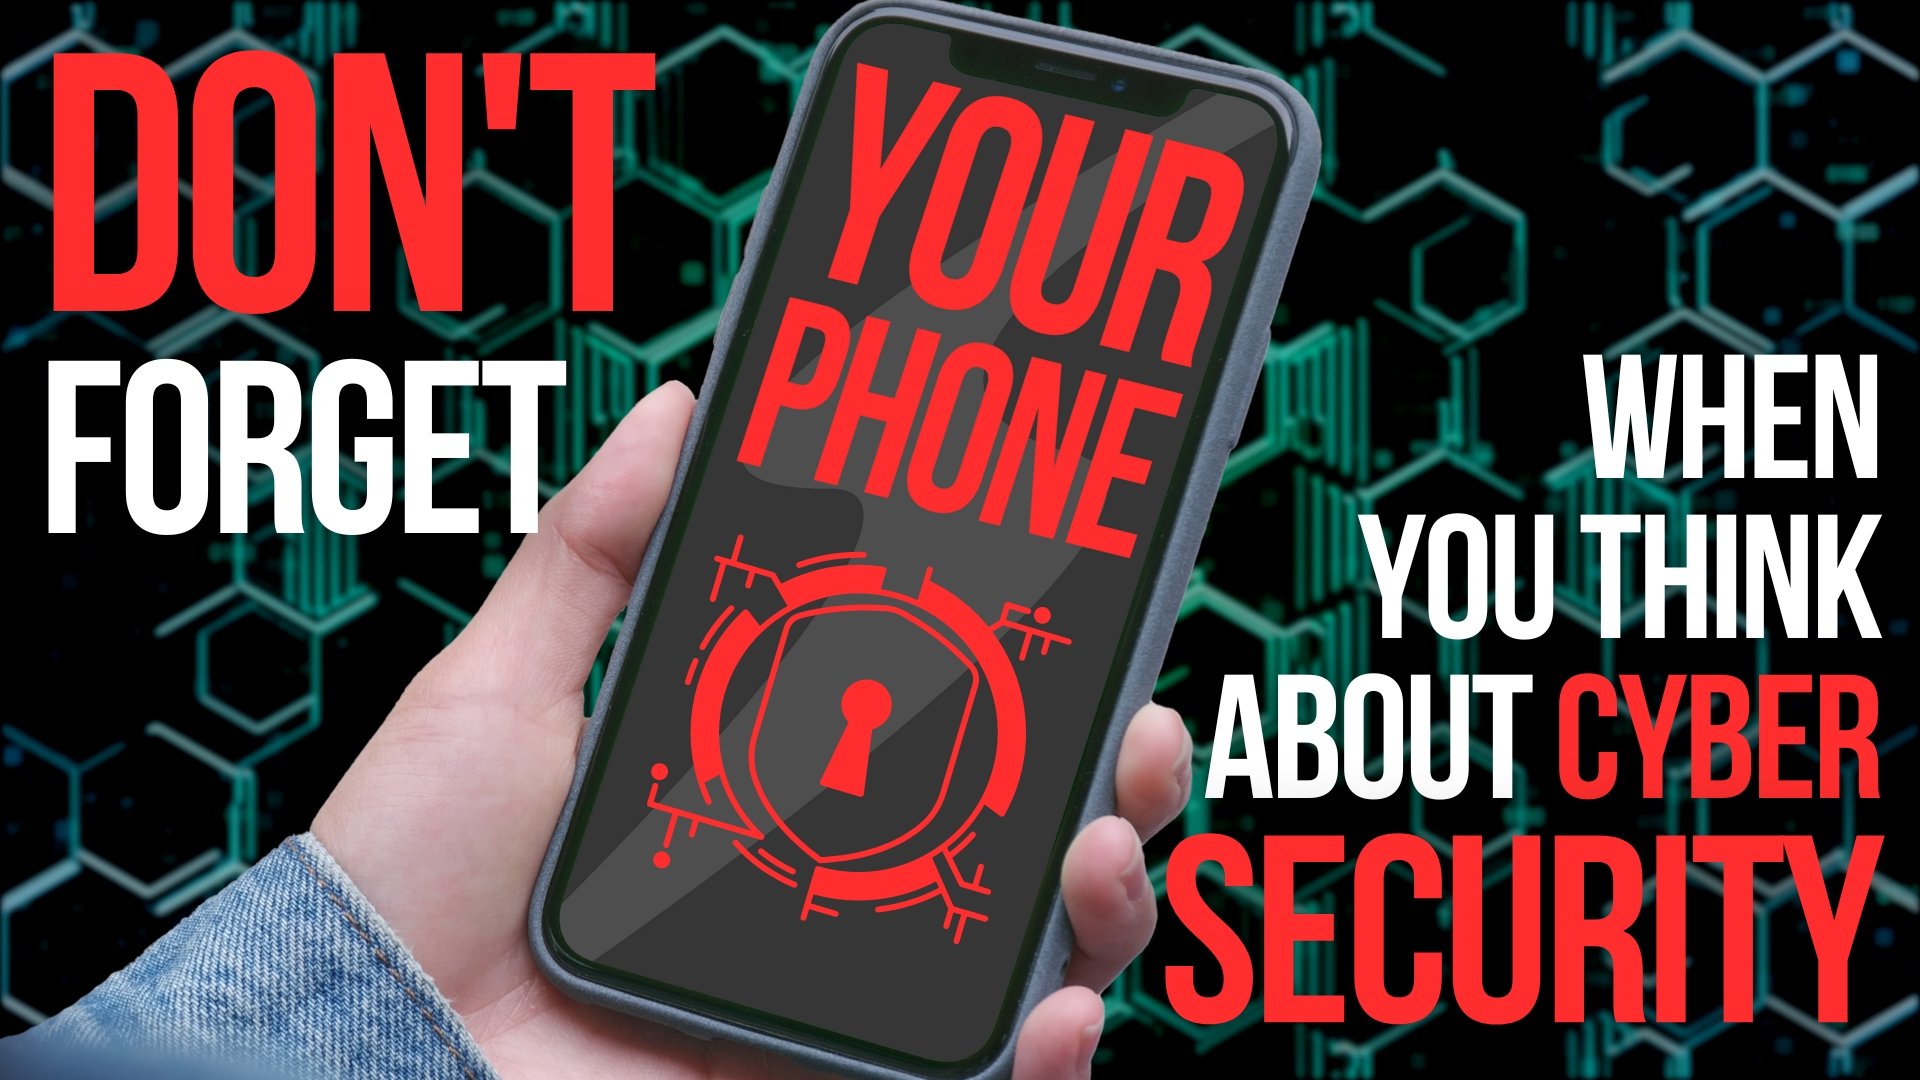 Don’t forget your phone when you think about cyber security 